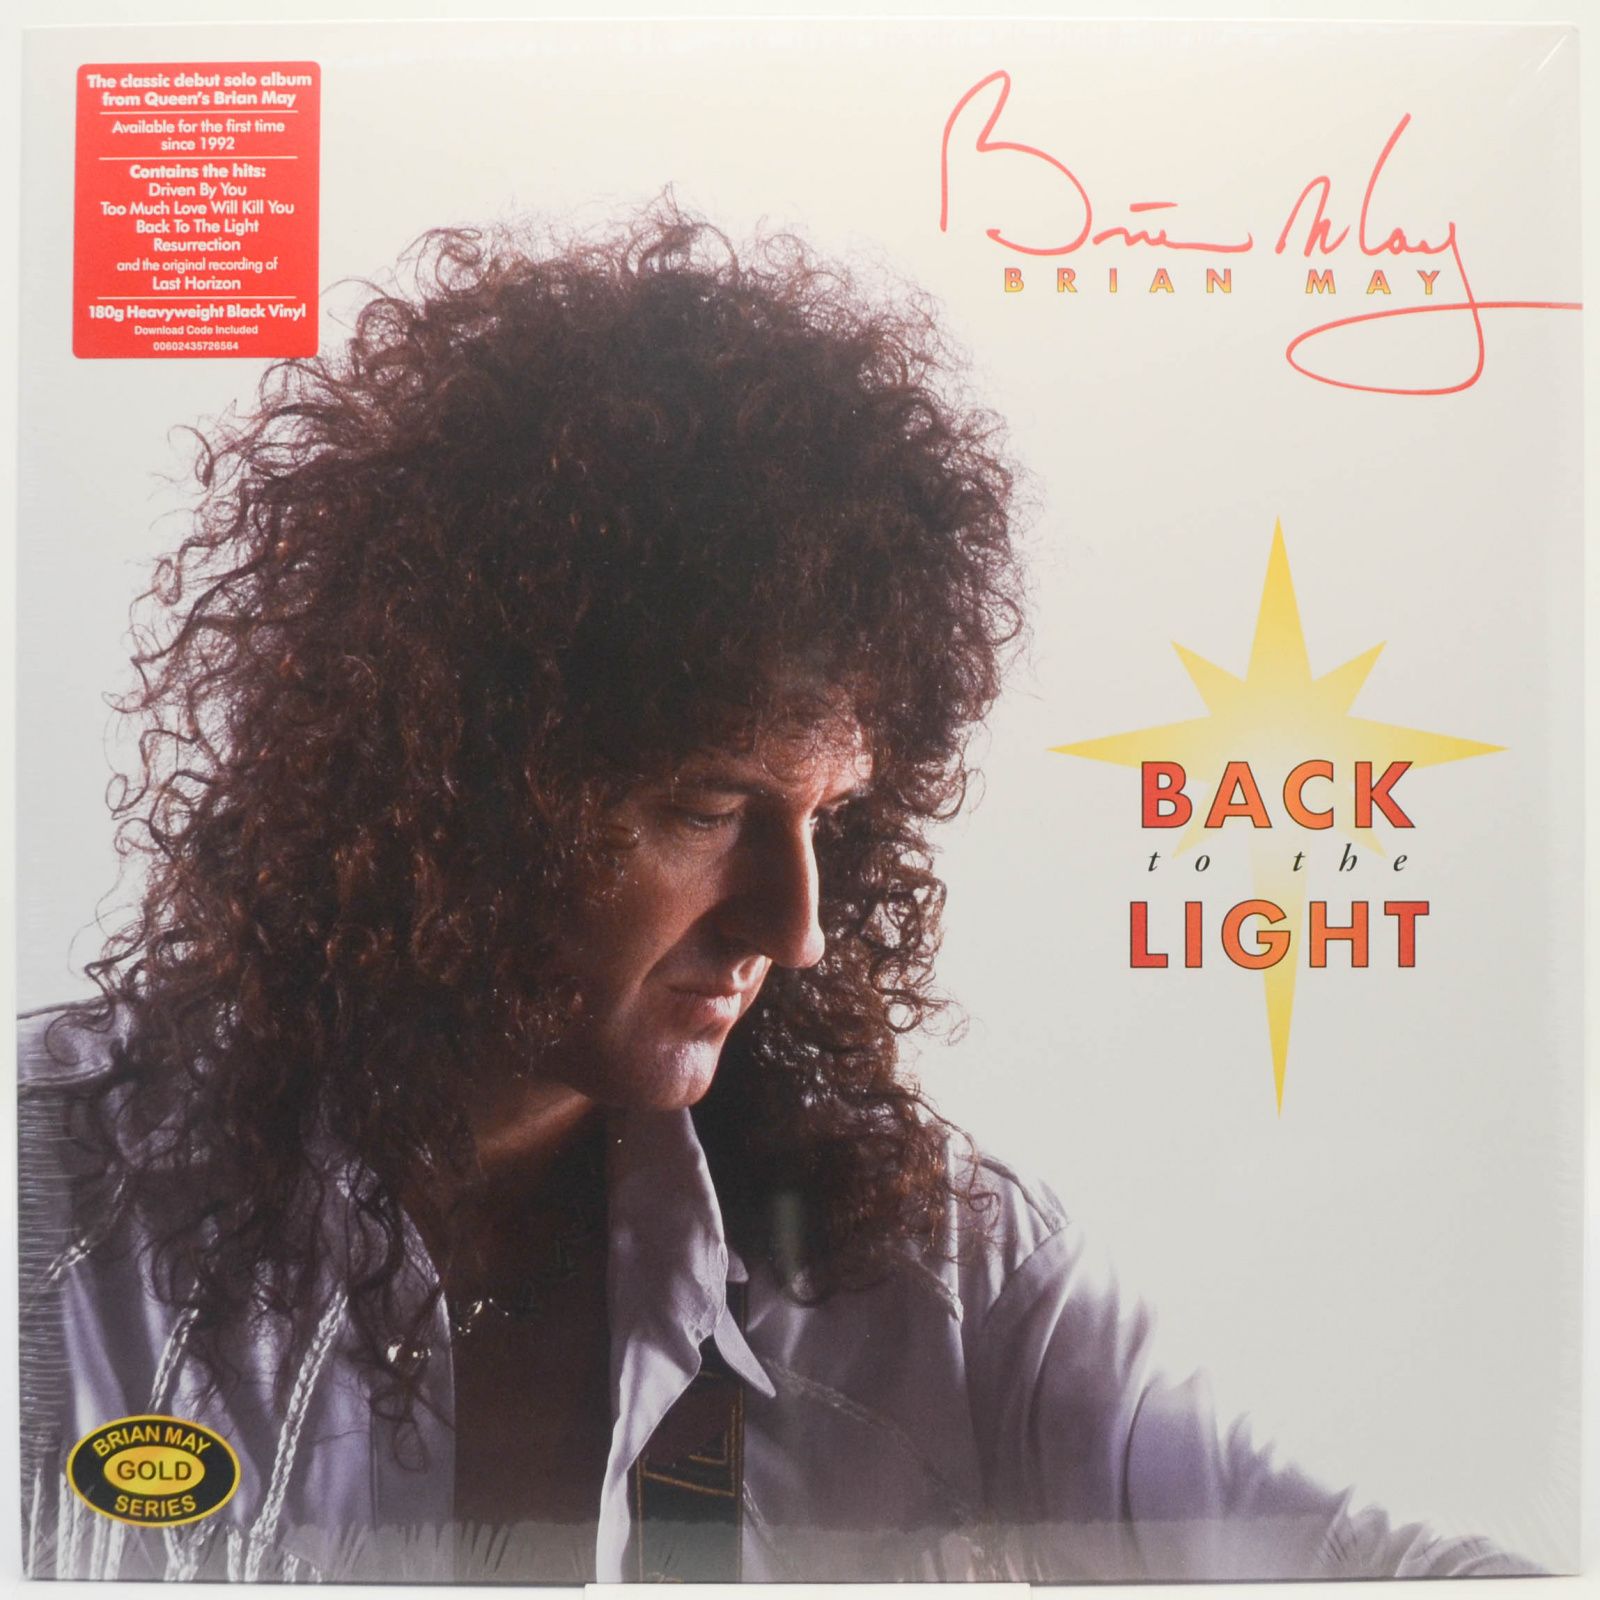 Brian May — Back To The Light, 1992